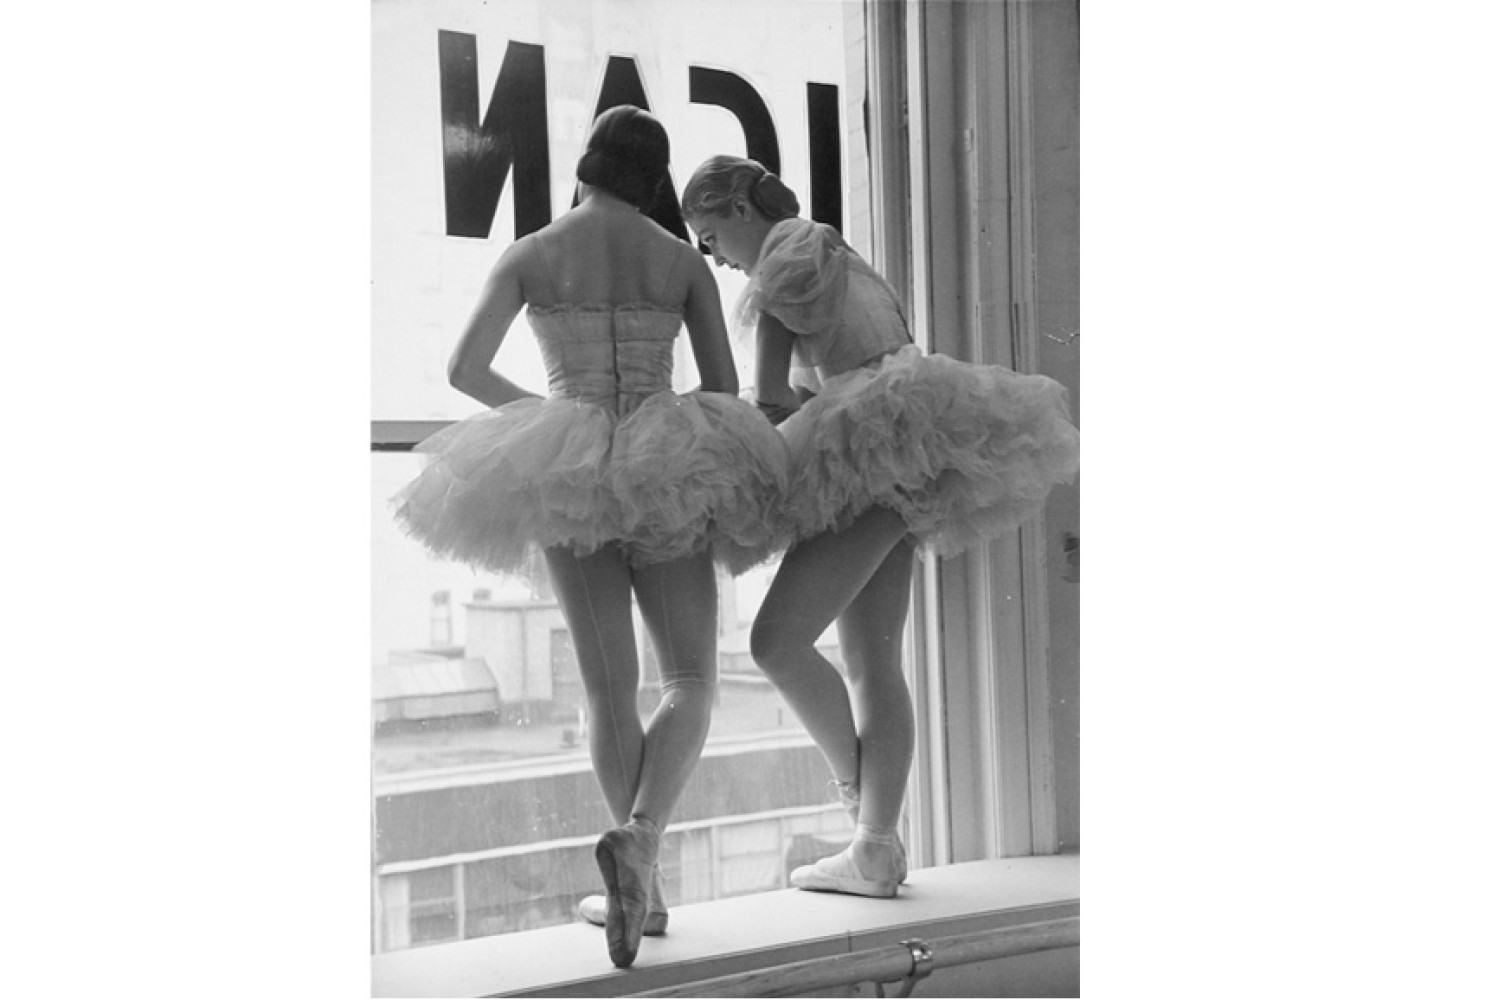 Ballerinas, the Balanchine School of American Ballet Theater, New York, 1936, By Alfred Eisenstaedt (German-American, 1898 - 1995); Published in Life magazine December 1936; Gelatin silver print; Gift of Mr. Robert W. Marks
1974.012.0165
